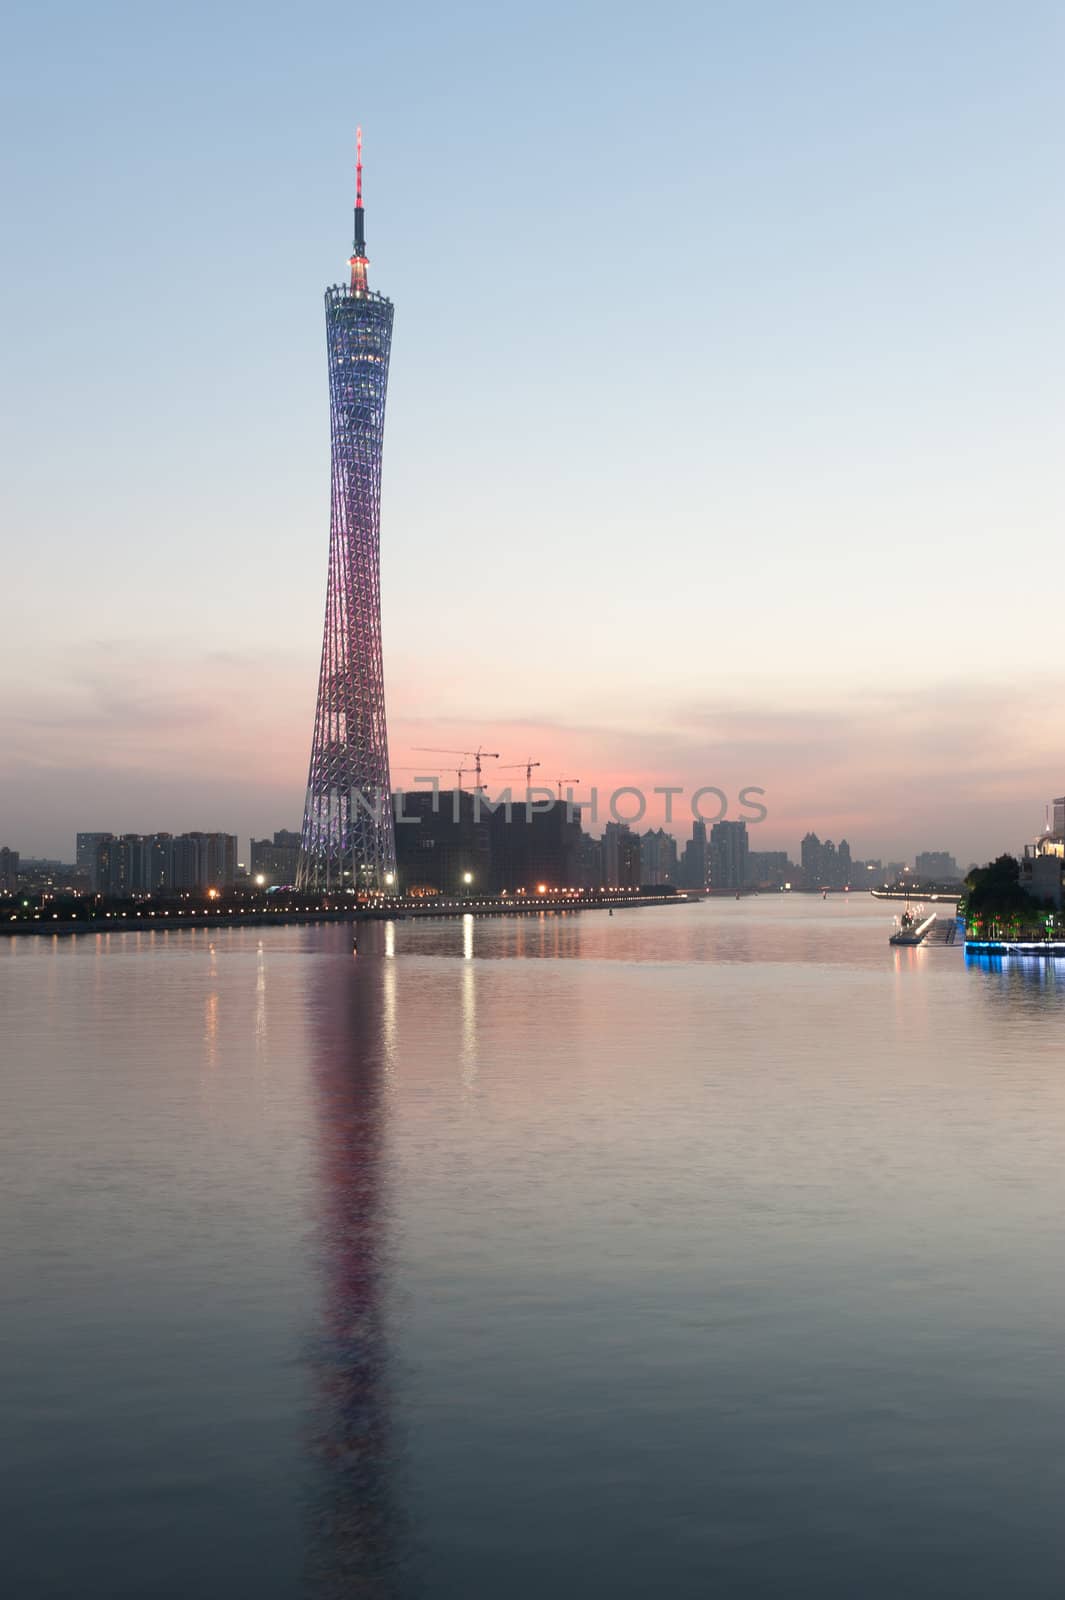 Guangzhou television tower near the Zhujiang river in Guangzhou city, Guangdong Province of China, where the Opening and Closing Ceremonies of the Guangzhou 2010 Asian Games will be held